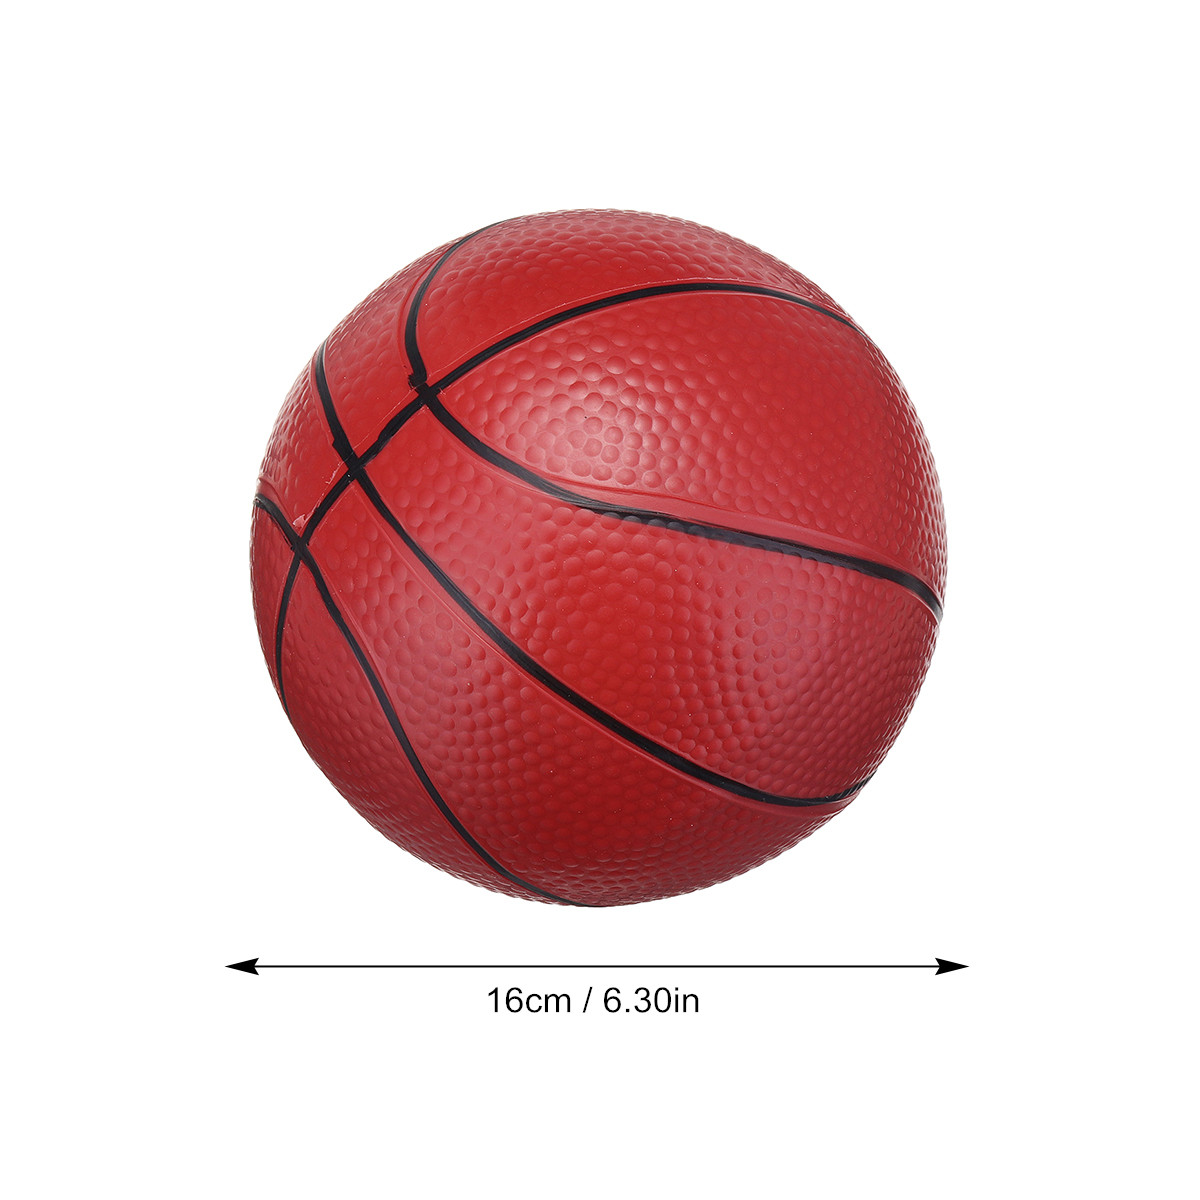 Children-Lightweight-Portable-Easy-Assemble-Basketball-Stand-Adjustable-Indoor-Outdoor-Sports-Toys-w-1829730-11